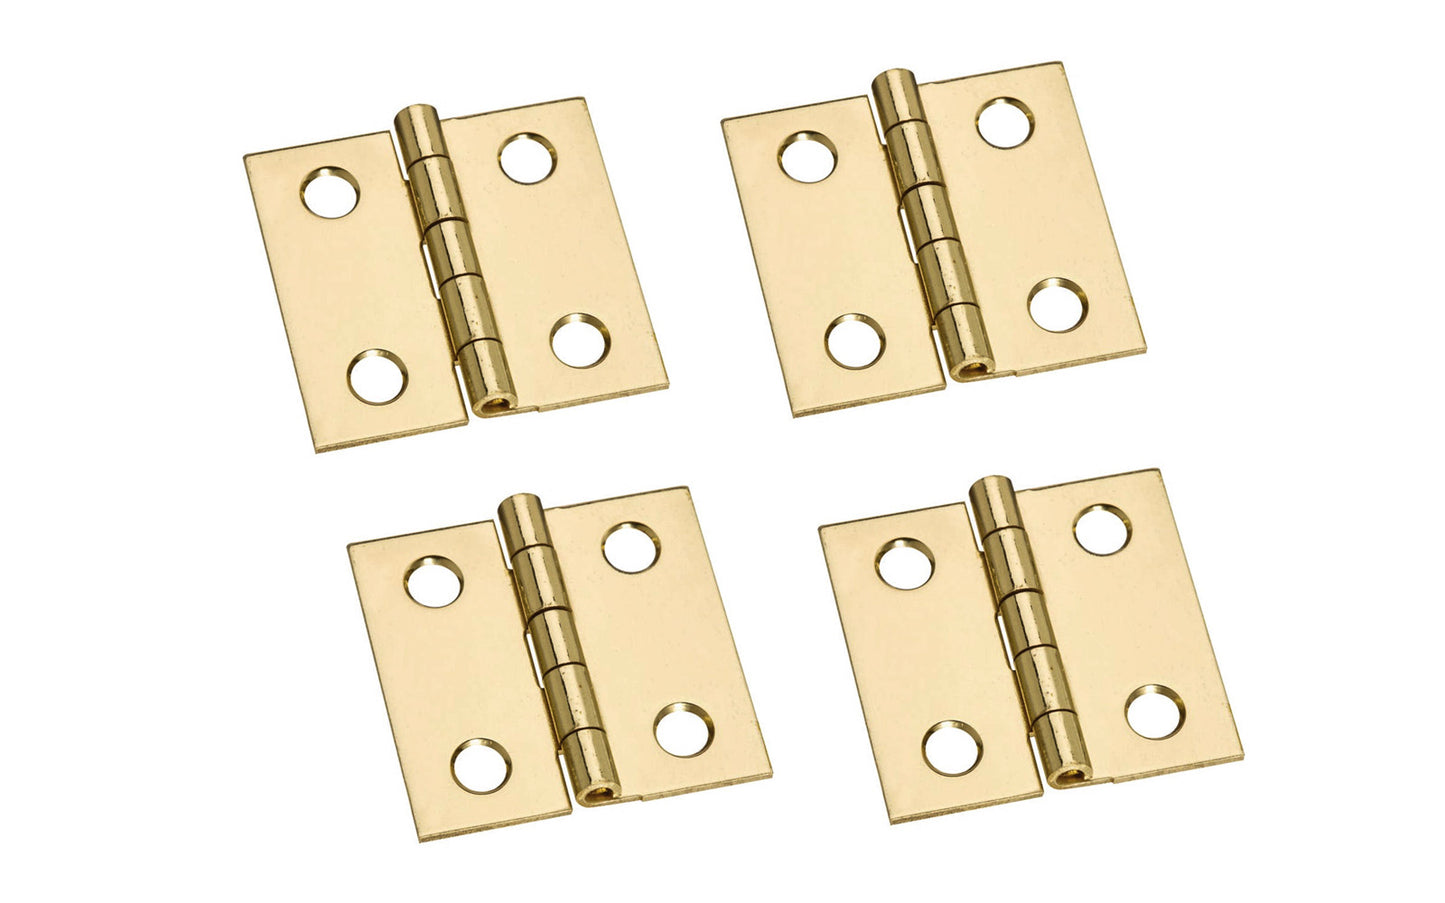 1" x 1" Solid Brass Hinges ~ 4 Pack ~ These solid brass hinges are designed to add a decorative appearance to small boxes, jewelry boxes, small lightweight cabinet doors, craft projects, etc. Made of solid brass material with a bright brass finish. 1" high x 1" wide. Surface mount. Non-removable pin. Four hinges. National Hardware Model No. N211-334. 